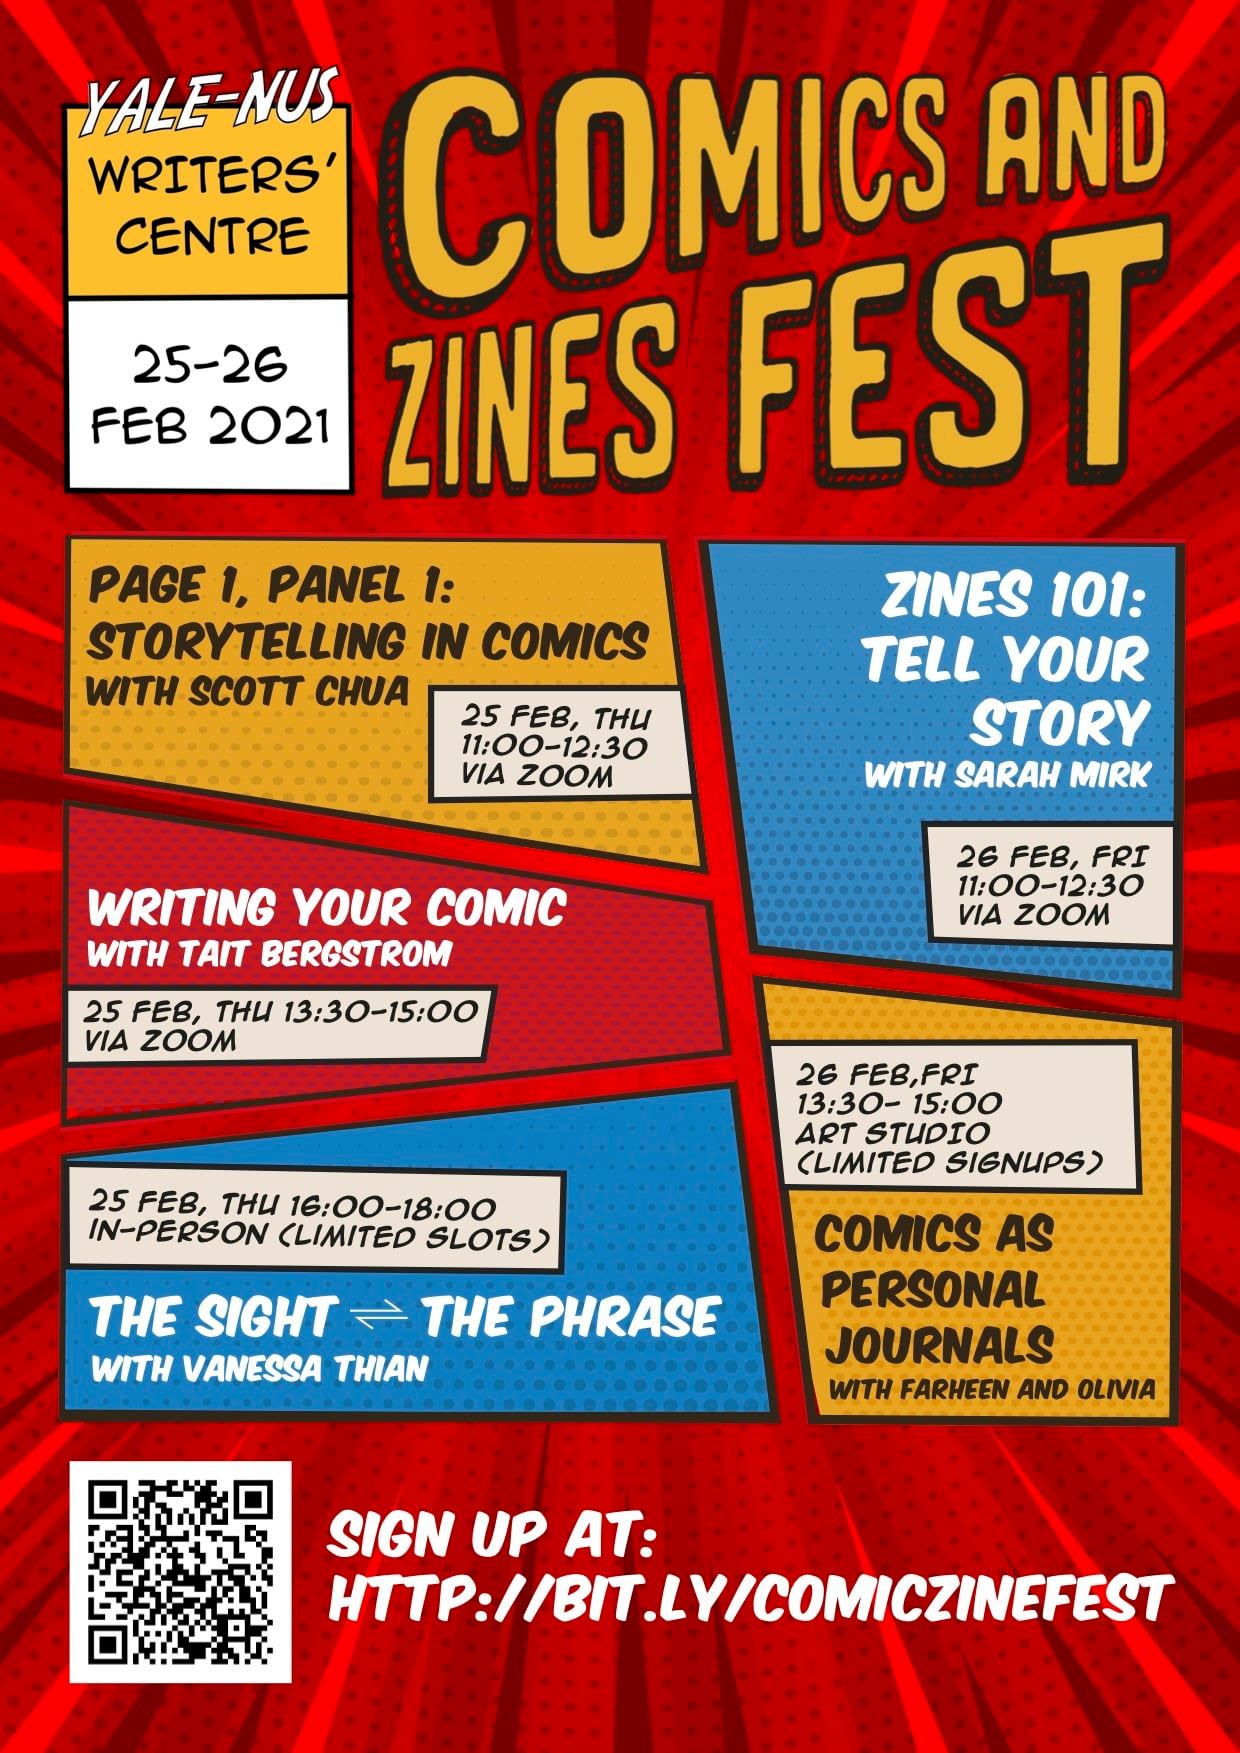 First of two posters designed like a comic book page, for comics and zines fest of writers' centre of yale N U S college on 25 to 26 February 2021. It hosts five events. First, page one panel one, storytelling in comics, with Scott Chua. Second, zines one oh one, tell your story, with Sarah Mirk. Third, writing your comic, with Tait Bergstrom. Fourth, the sight, bidirectional arrow, the phrase, with Vanessa Thian. Fifth, comics as personal journals, with Farheen and Olivia.